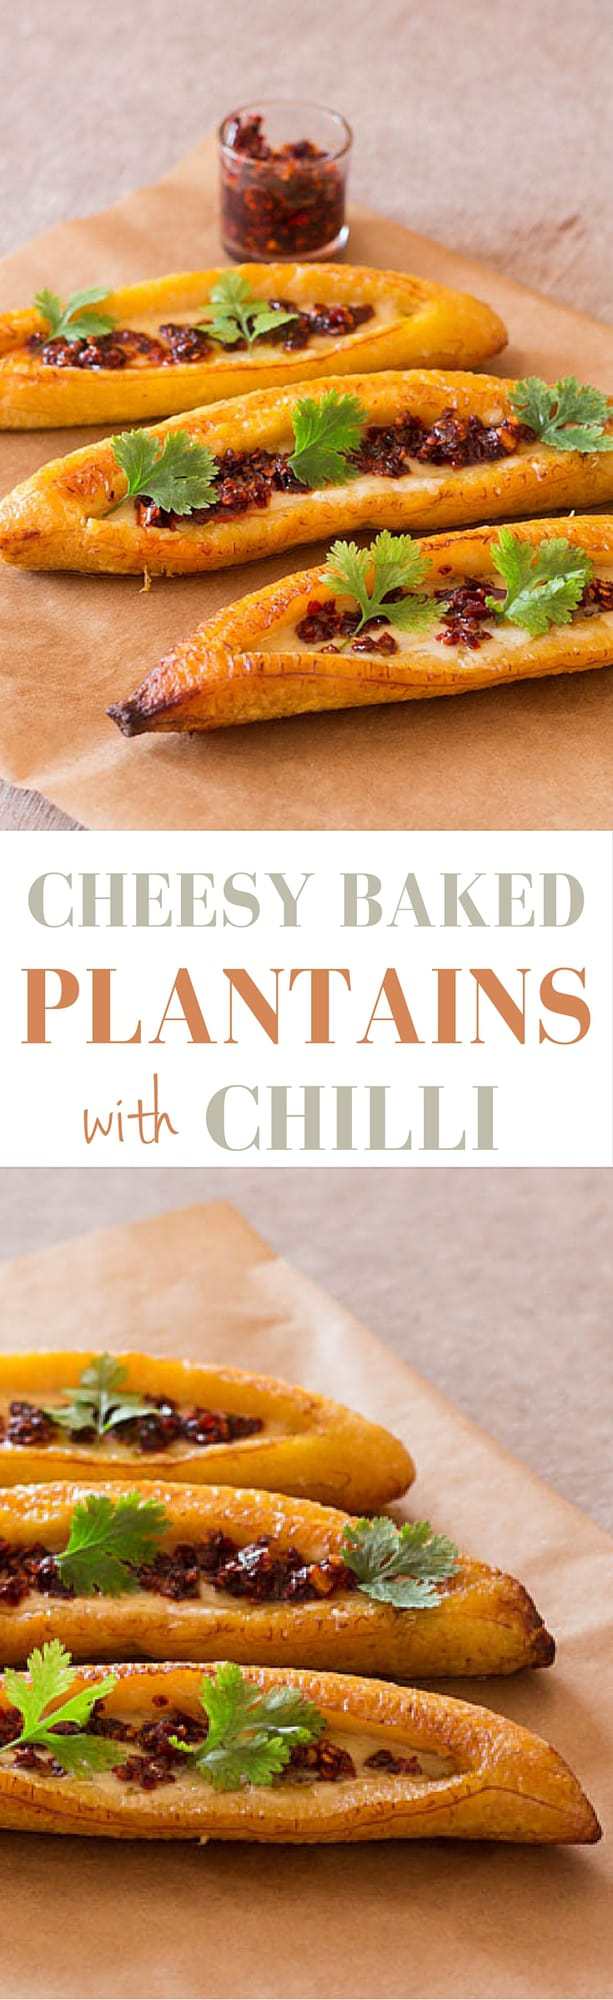 Cheesy Baked Plantains Recipe | Plantains From A Pantry